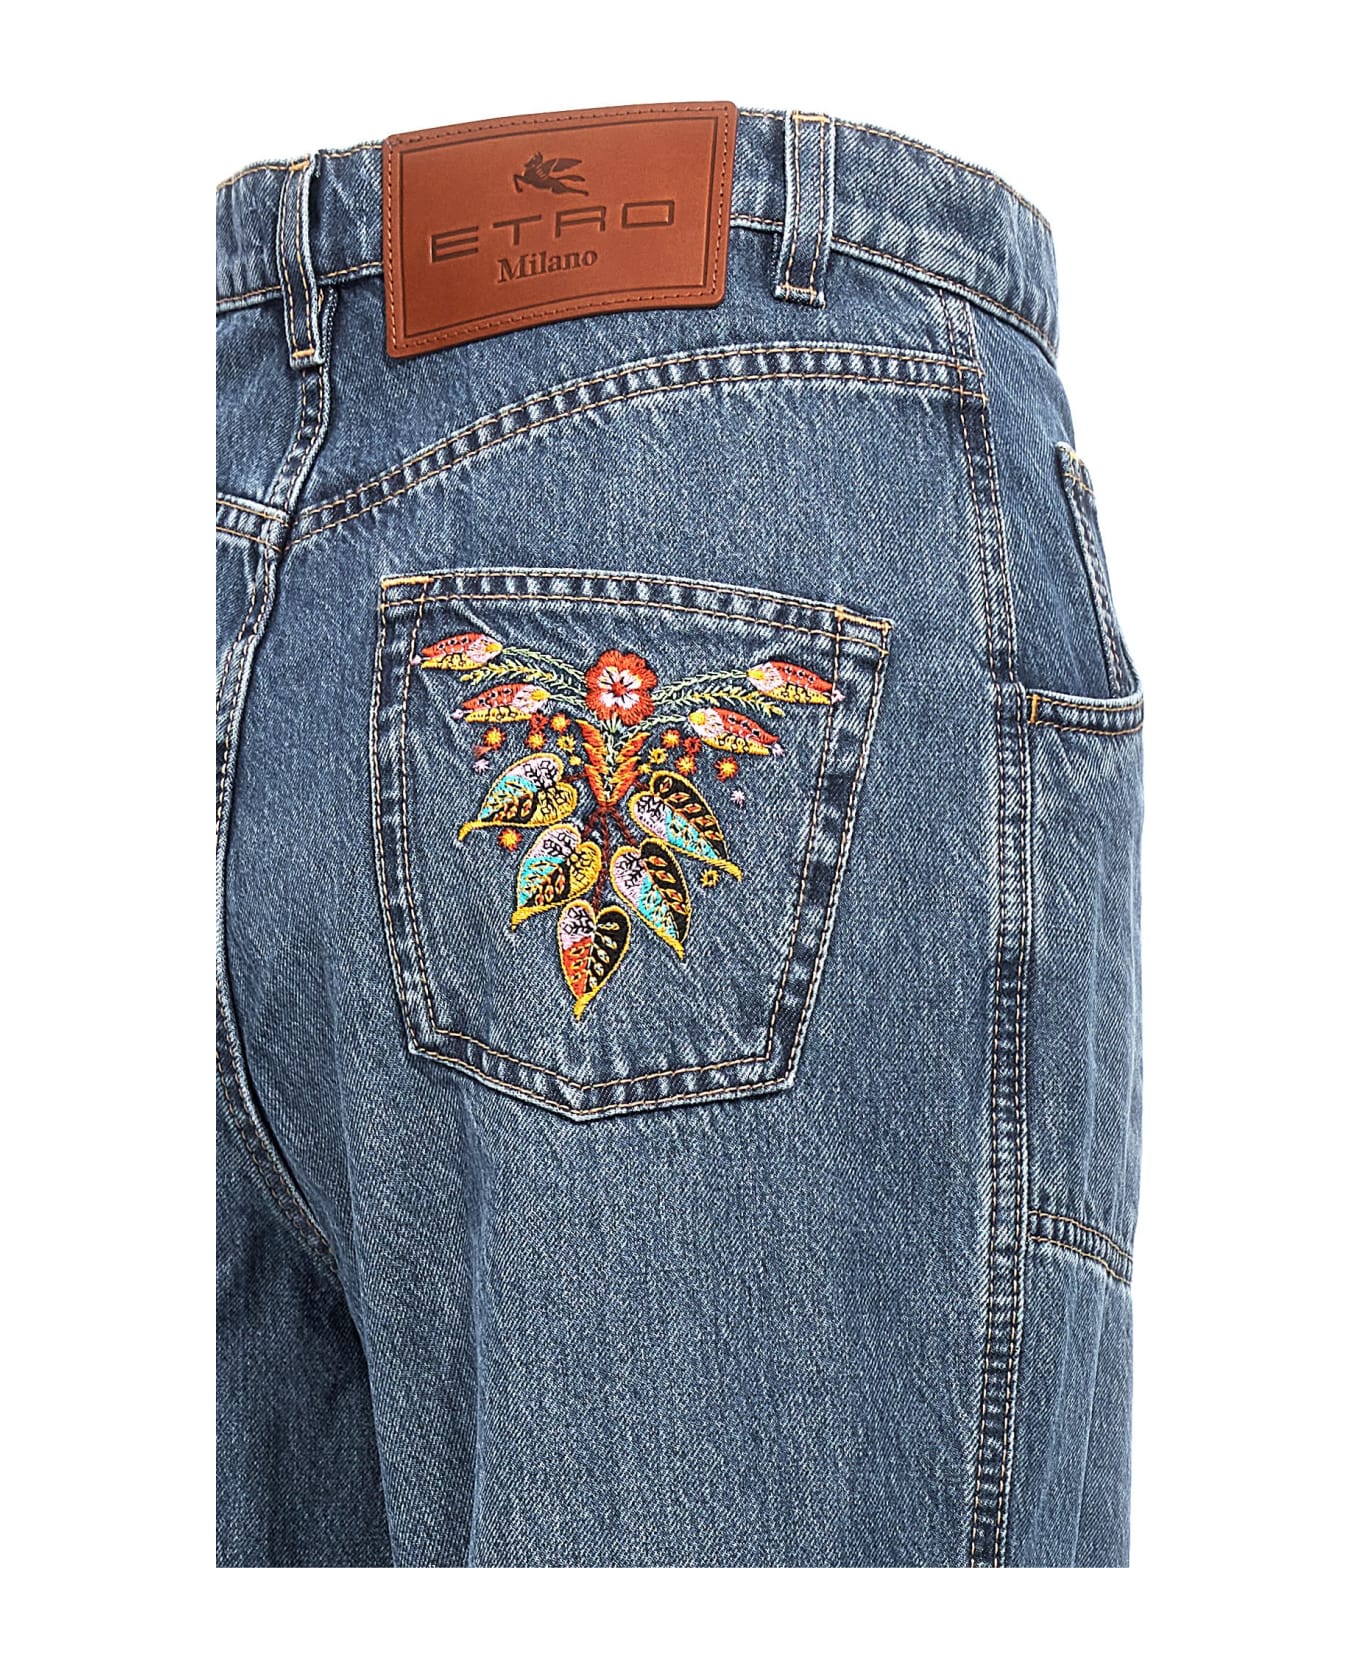 Etro Flared Jeans - Blue